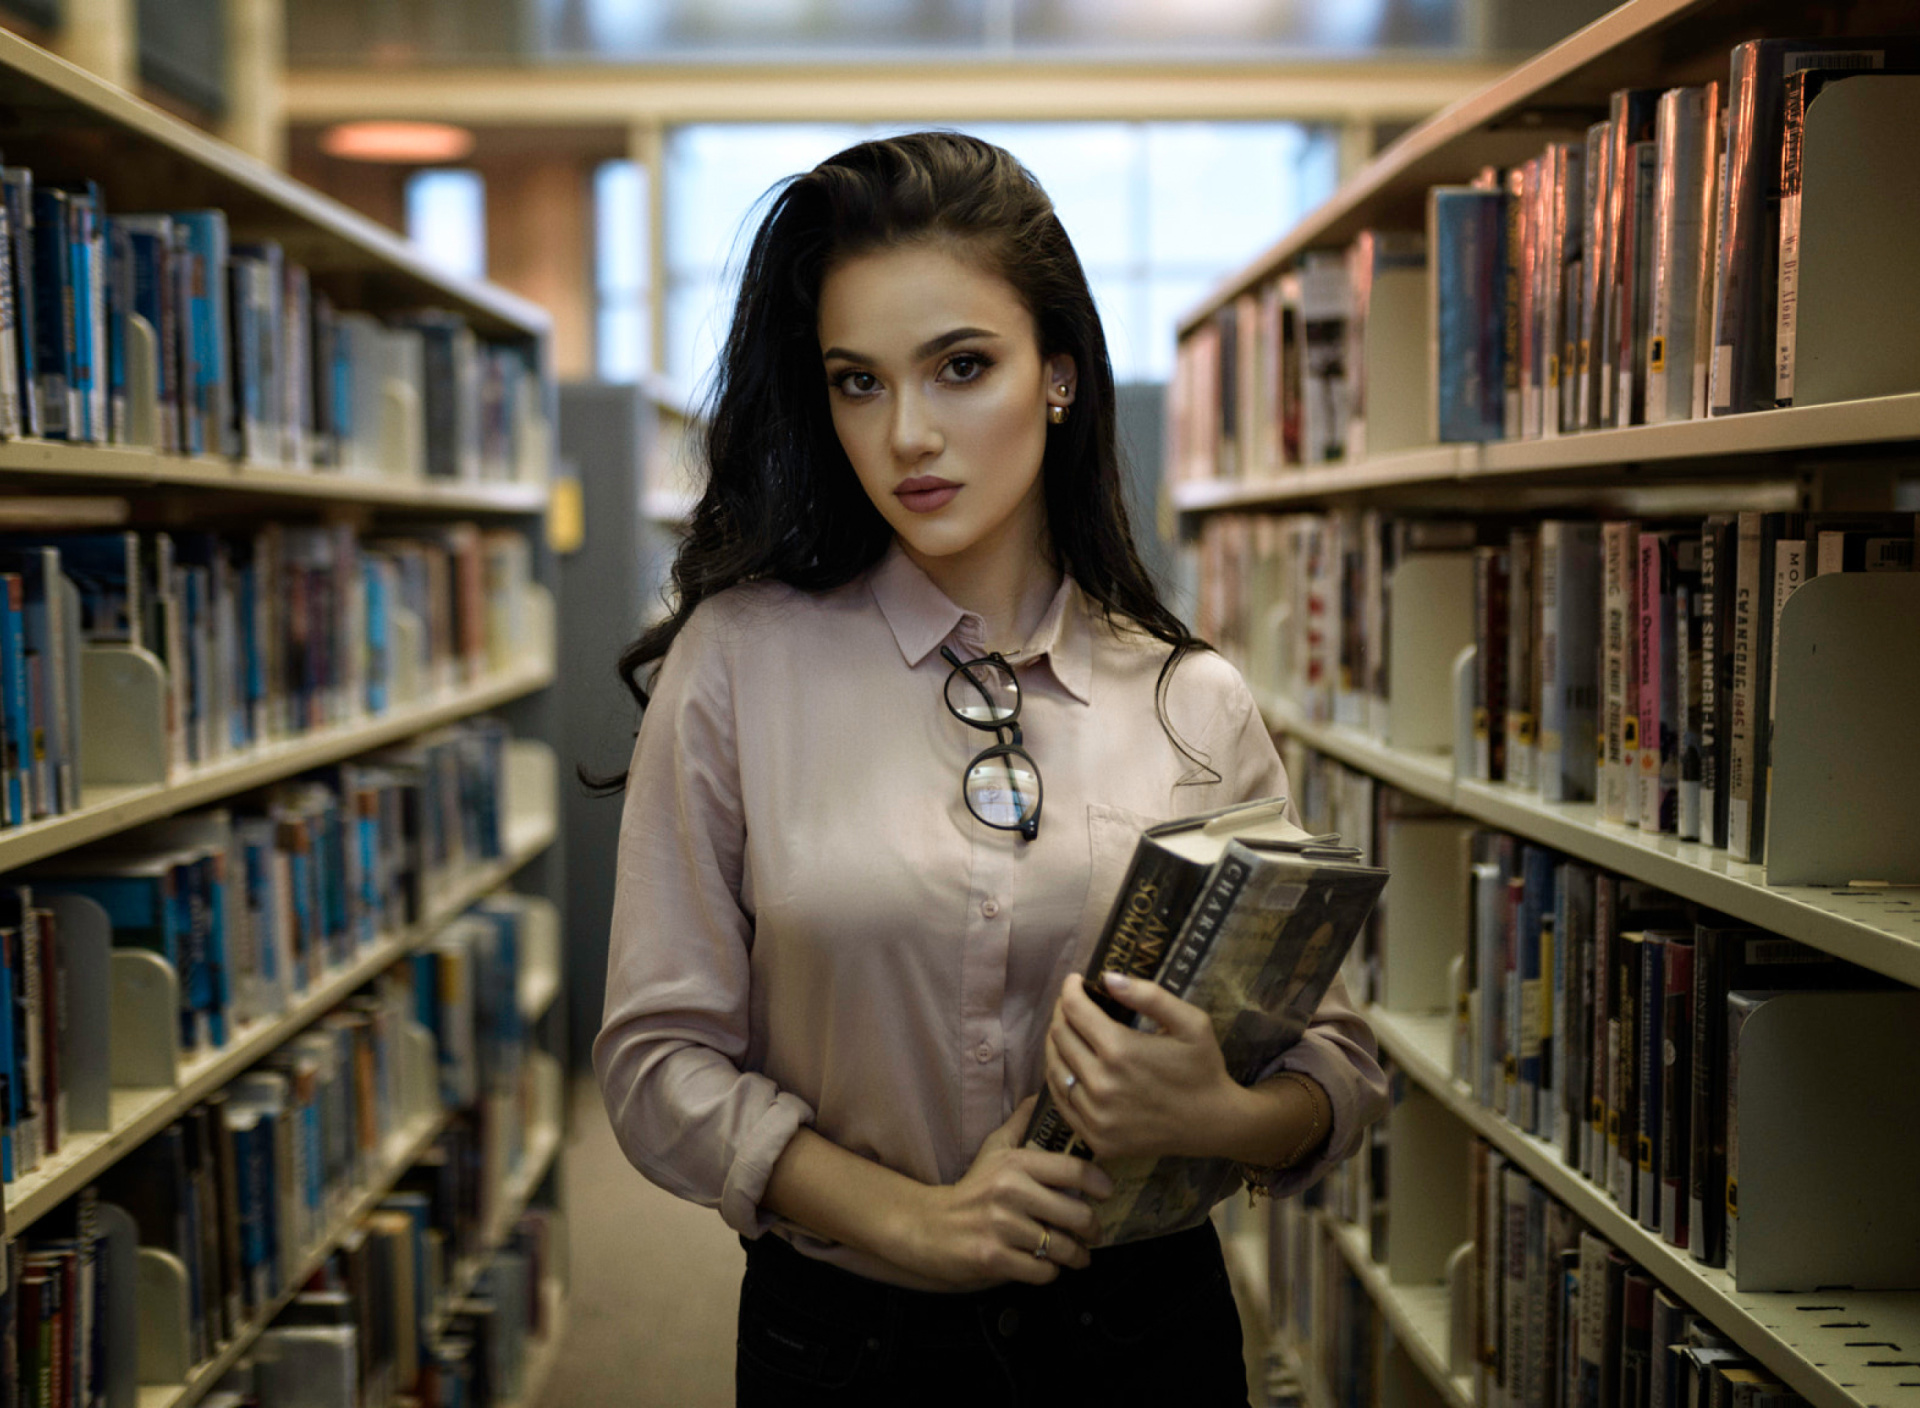 Girl with books in library screenshot #1 1920x1408